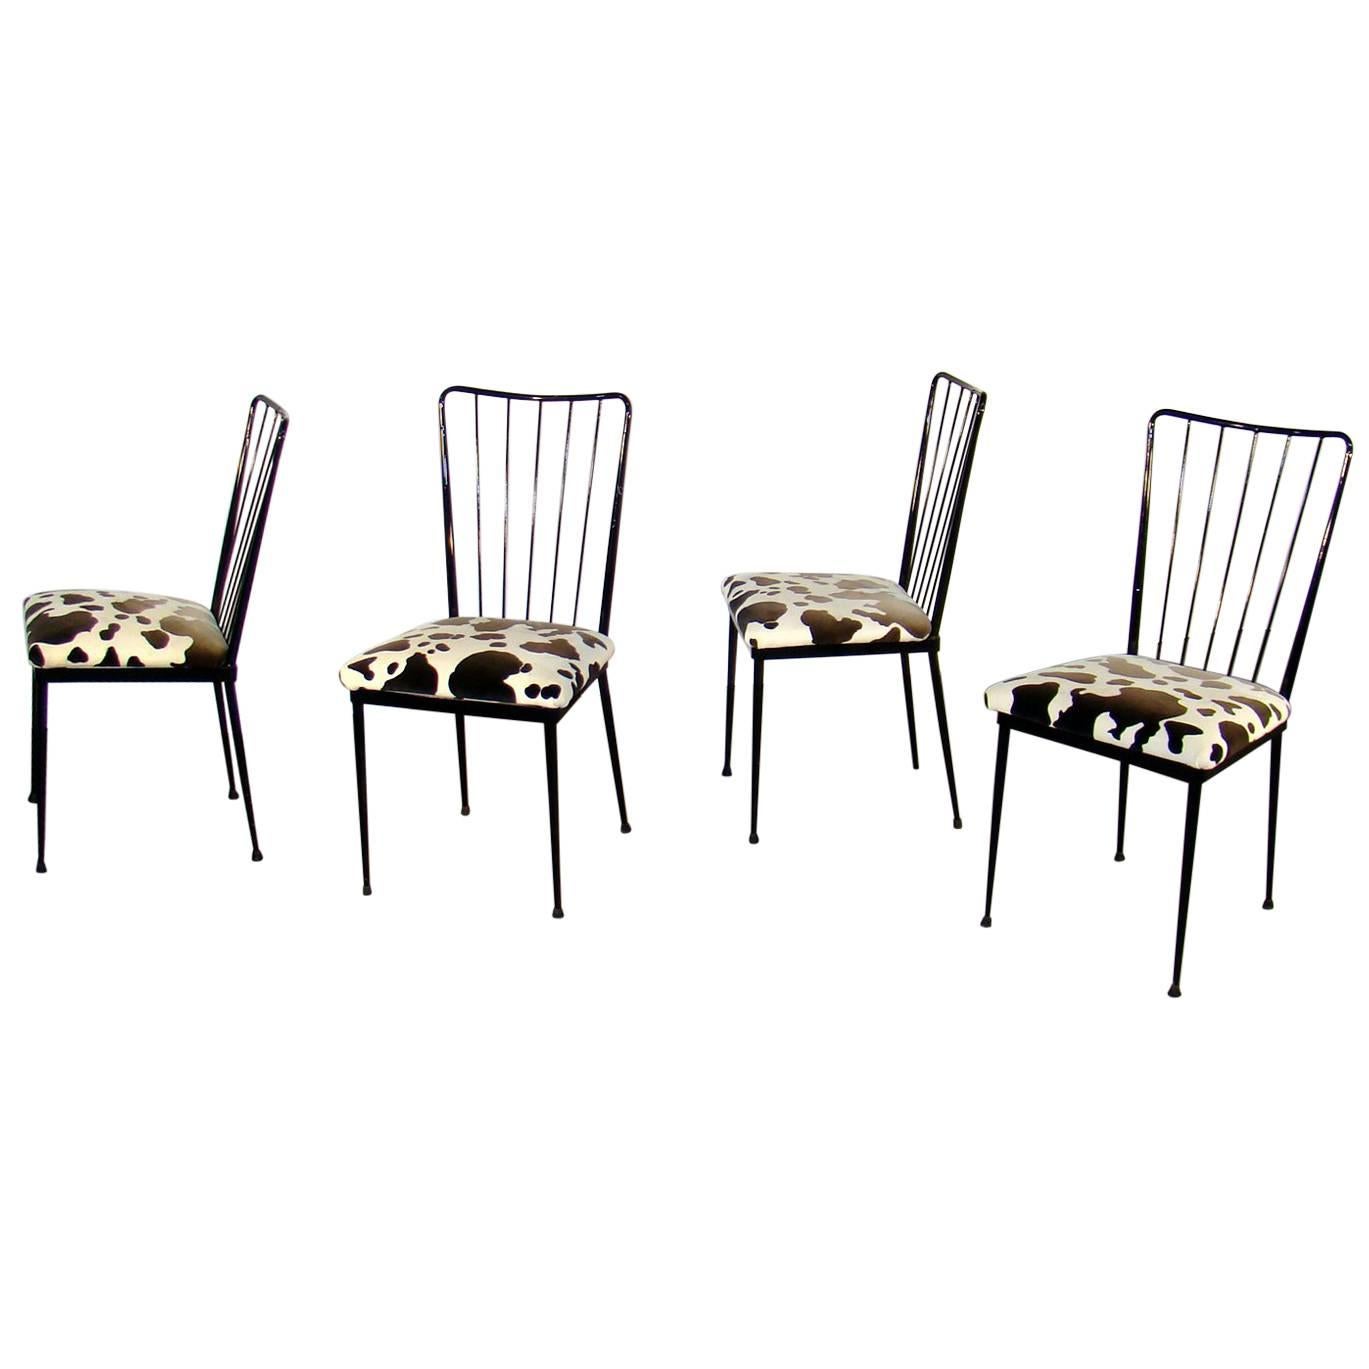 Four Chairs in Lacquered Metal in the Style of Colette Gueden, circa 1960